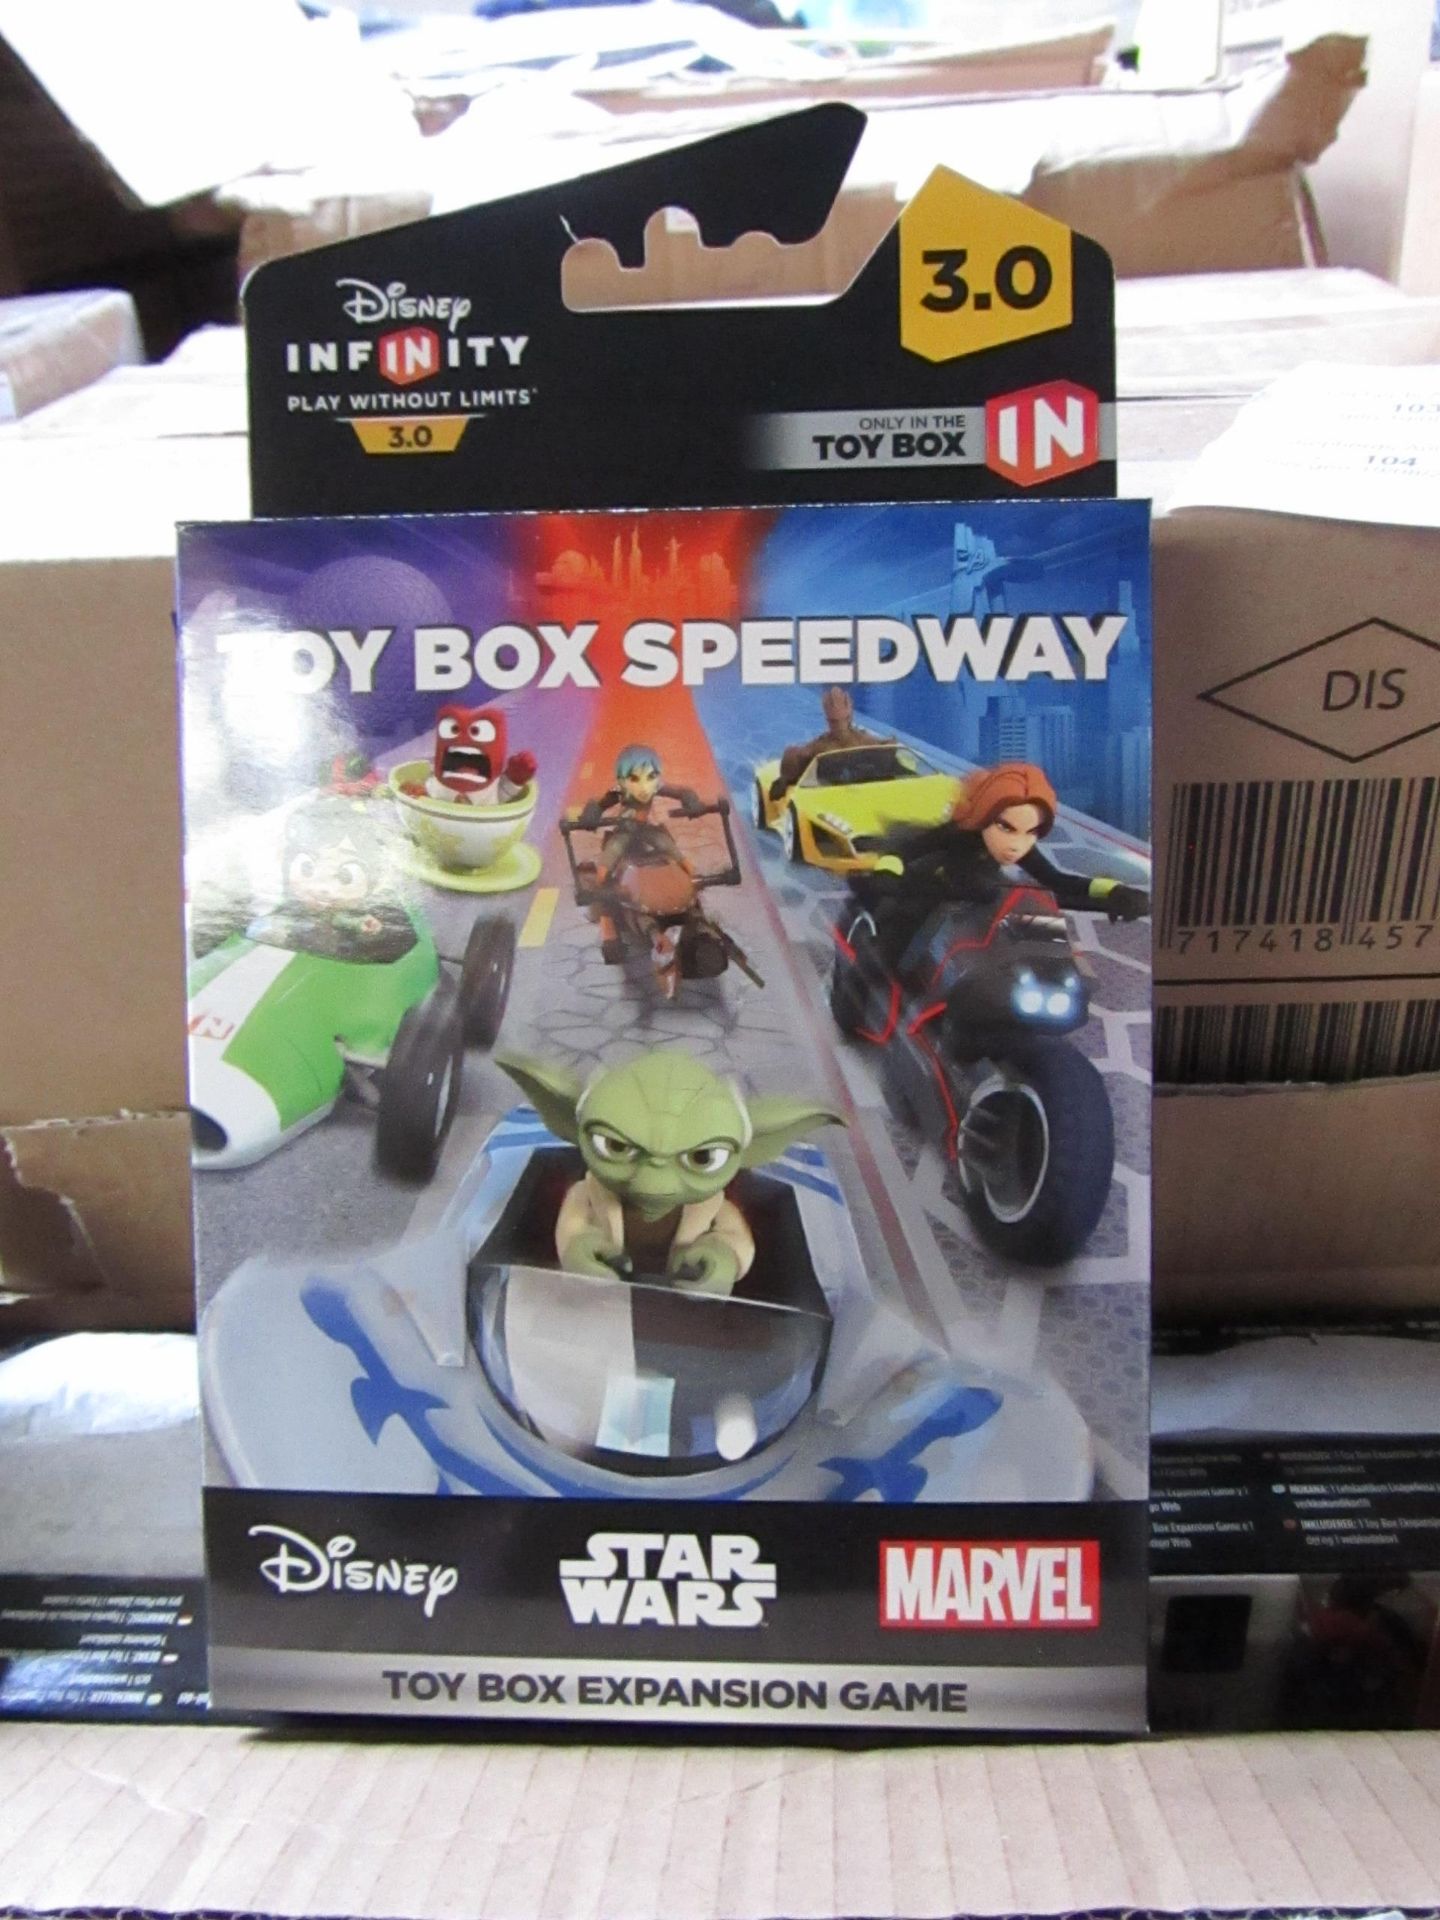 6 x Disney Infinity Star Wars Toy Box Speedway 3.0 RRP £3.99 each on Amazon new & packaged